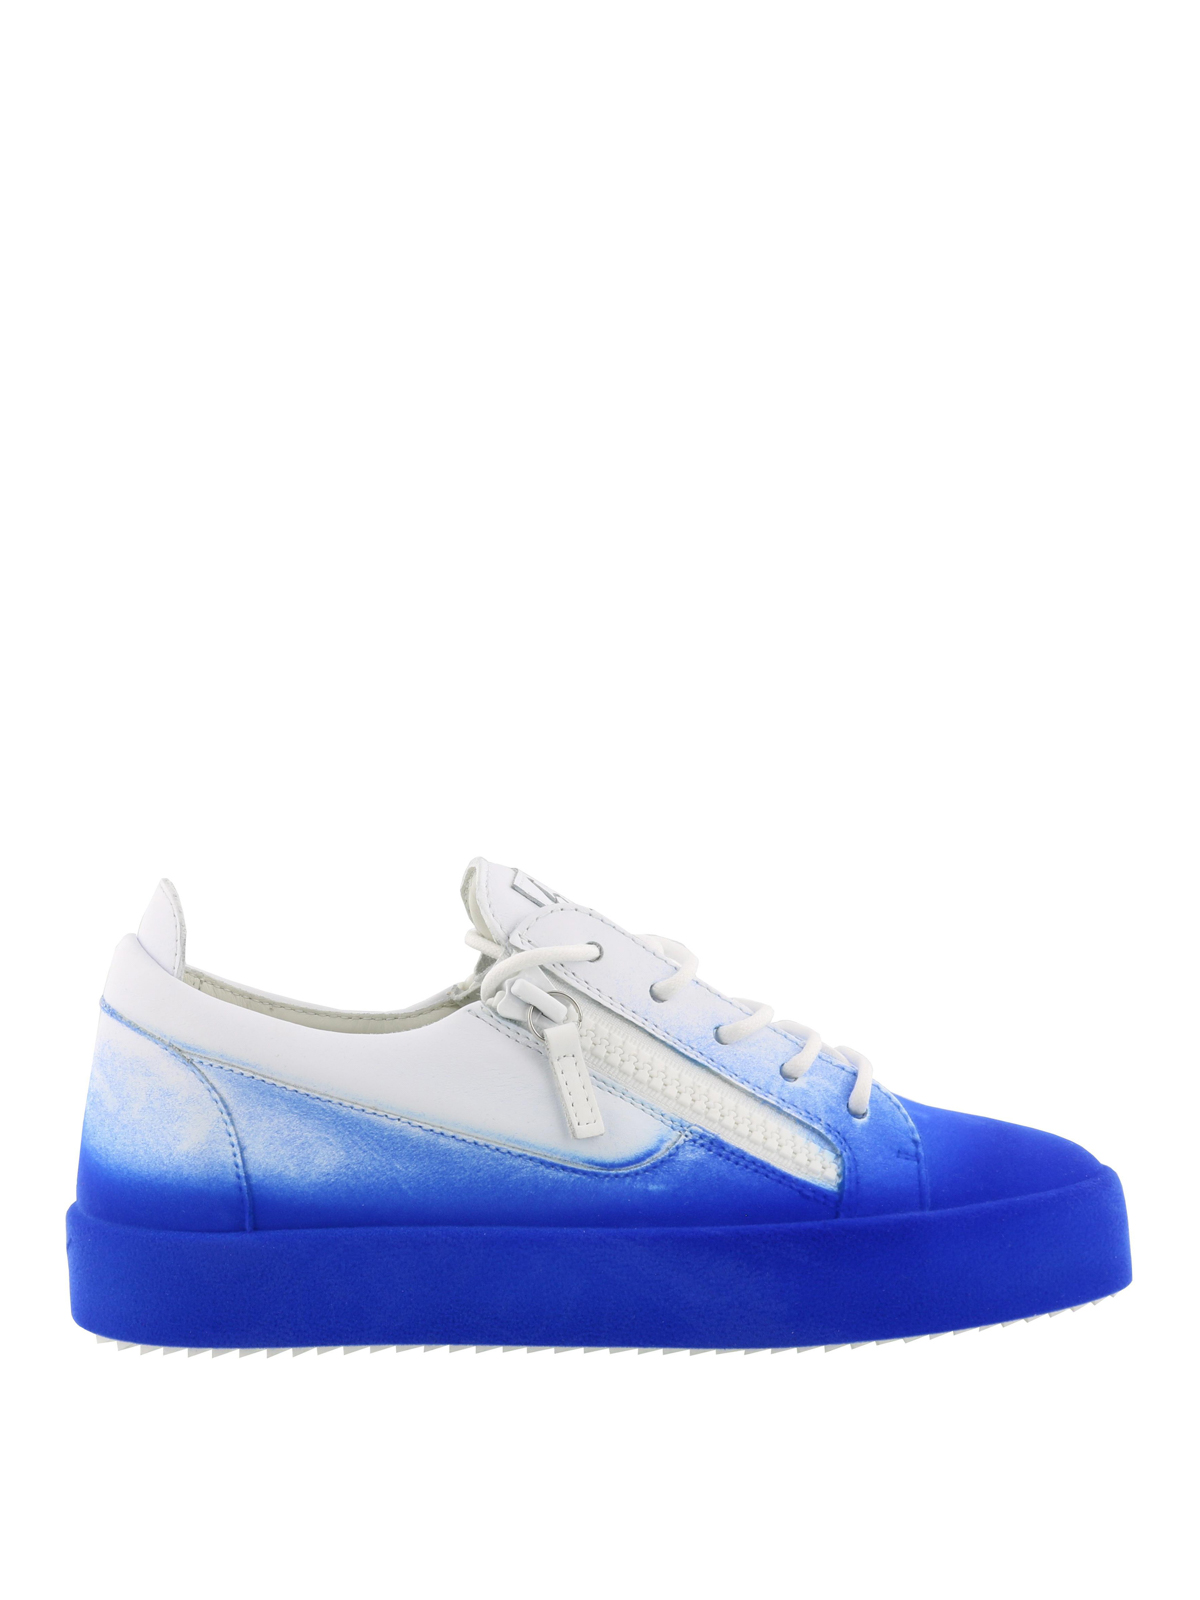 Zanotti - New Unfinished blue coated sneakers - RM80010003